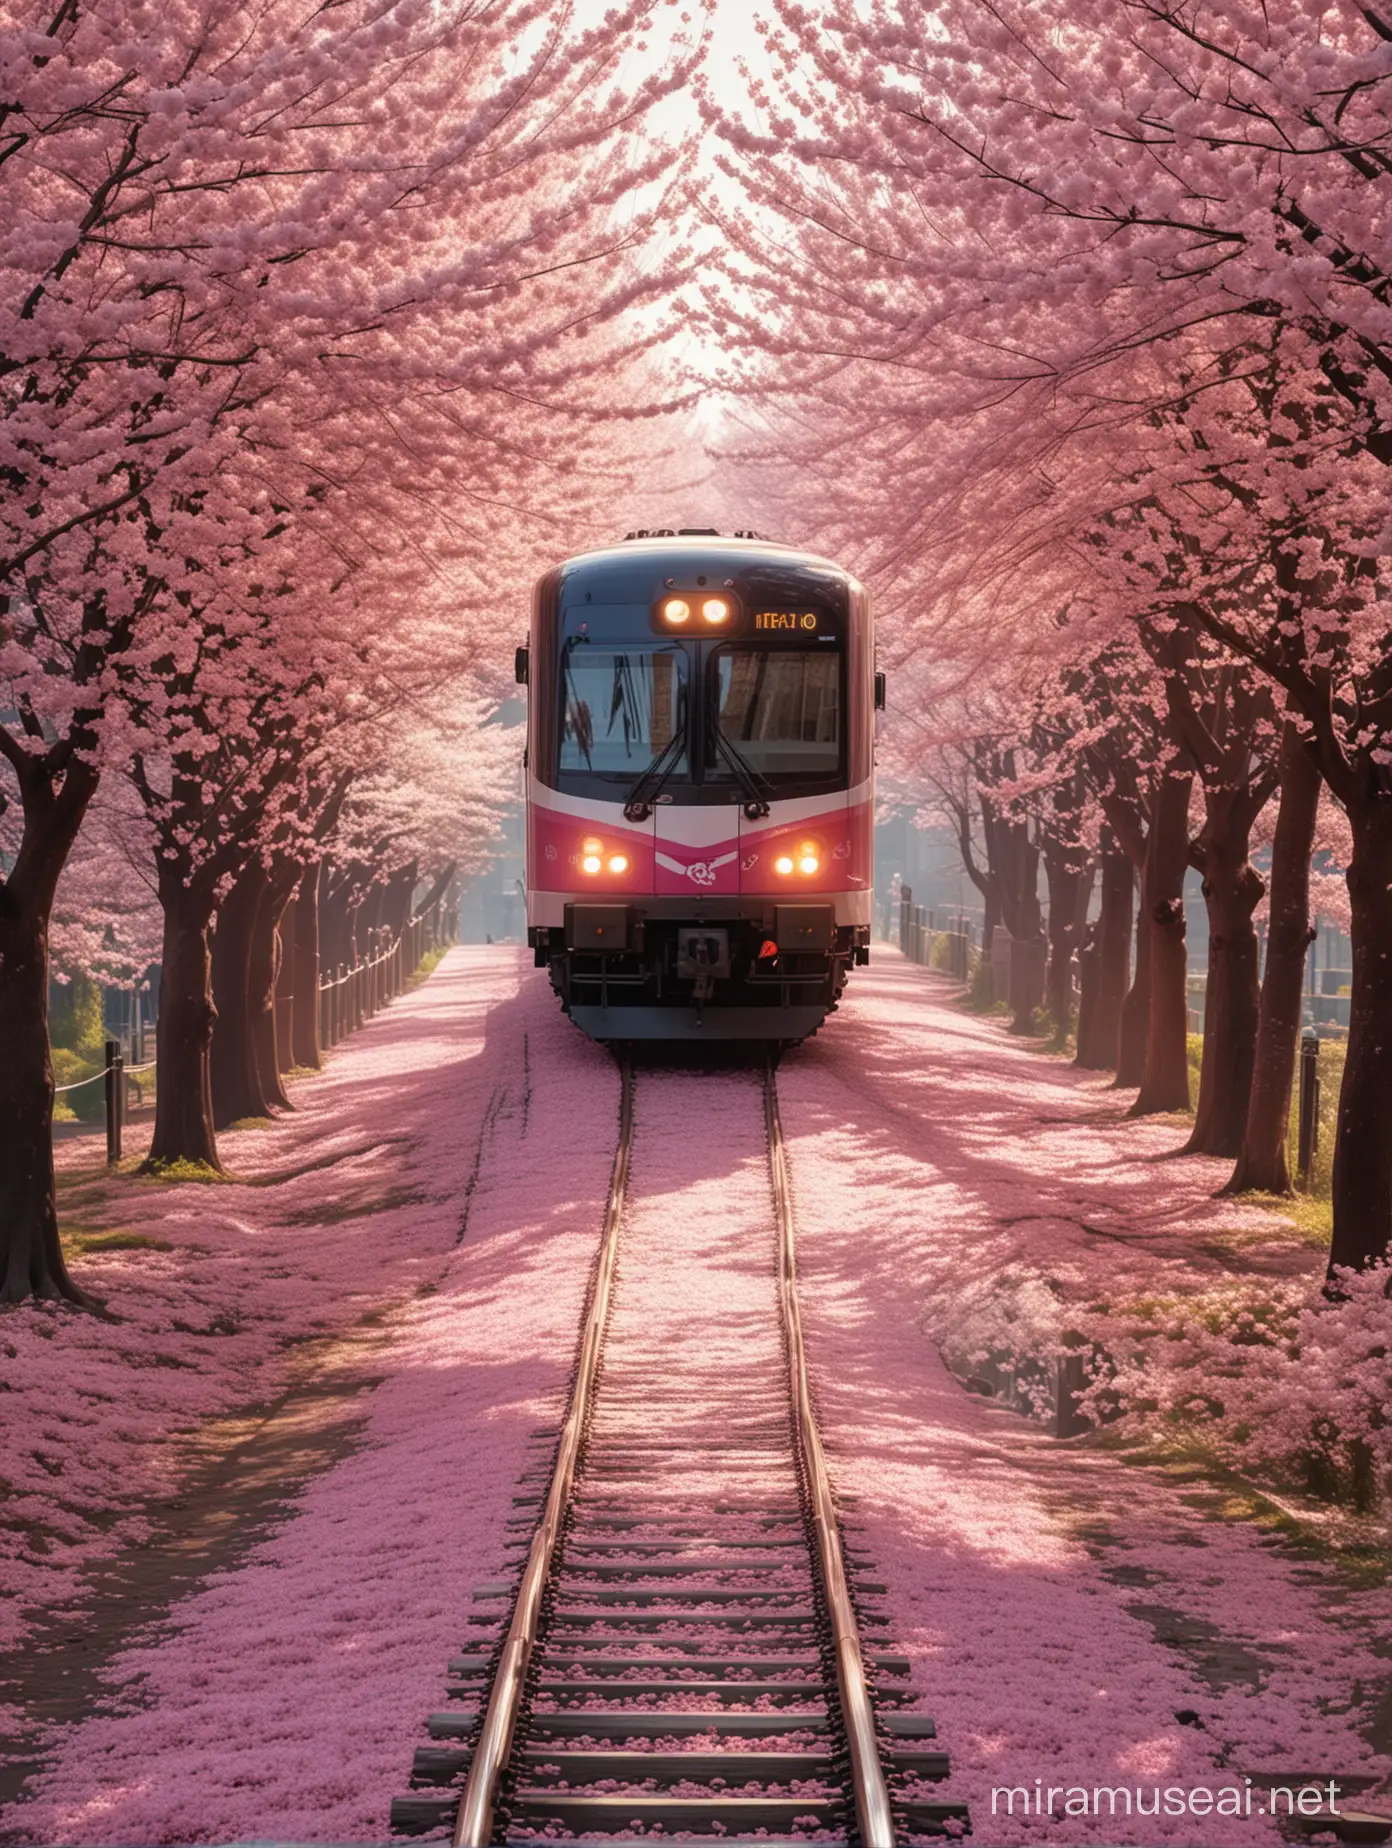 Scenic Cherry Blossom Tunnel Stunning 8K Photography of Curved Rail Train Amid Blossoms